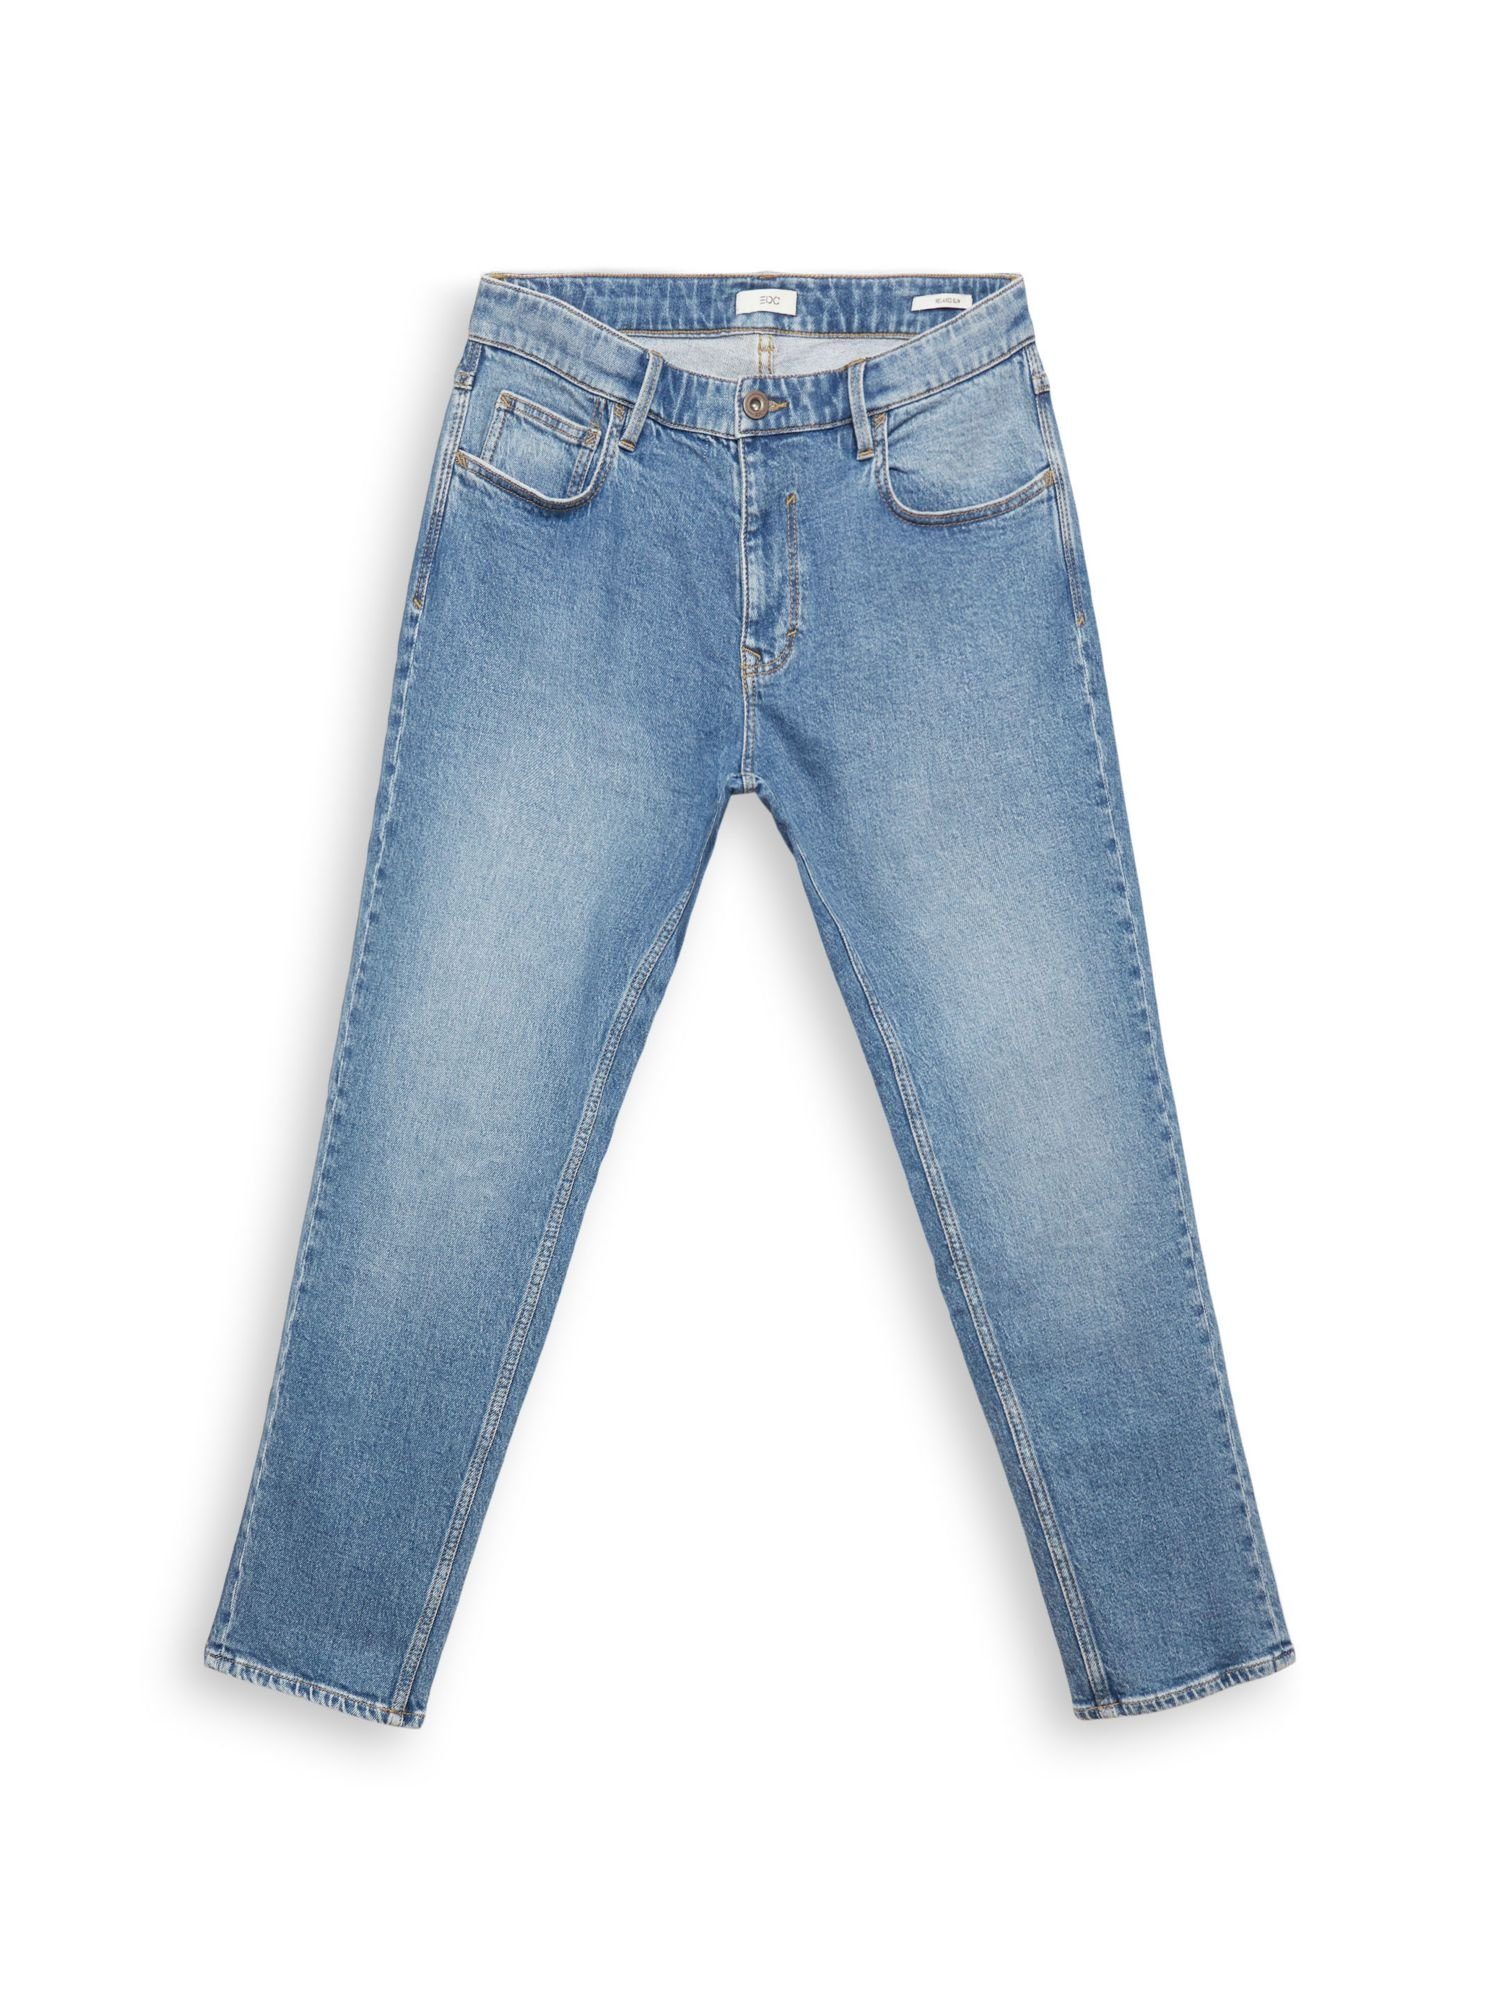 edc by Esprit Stretch-Jeans Stretch-Jeans BLUE LIGHT WASHED